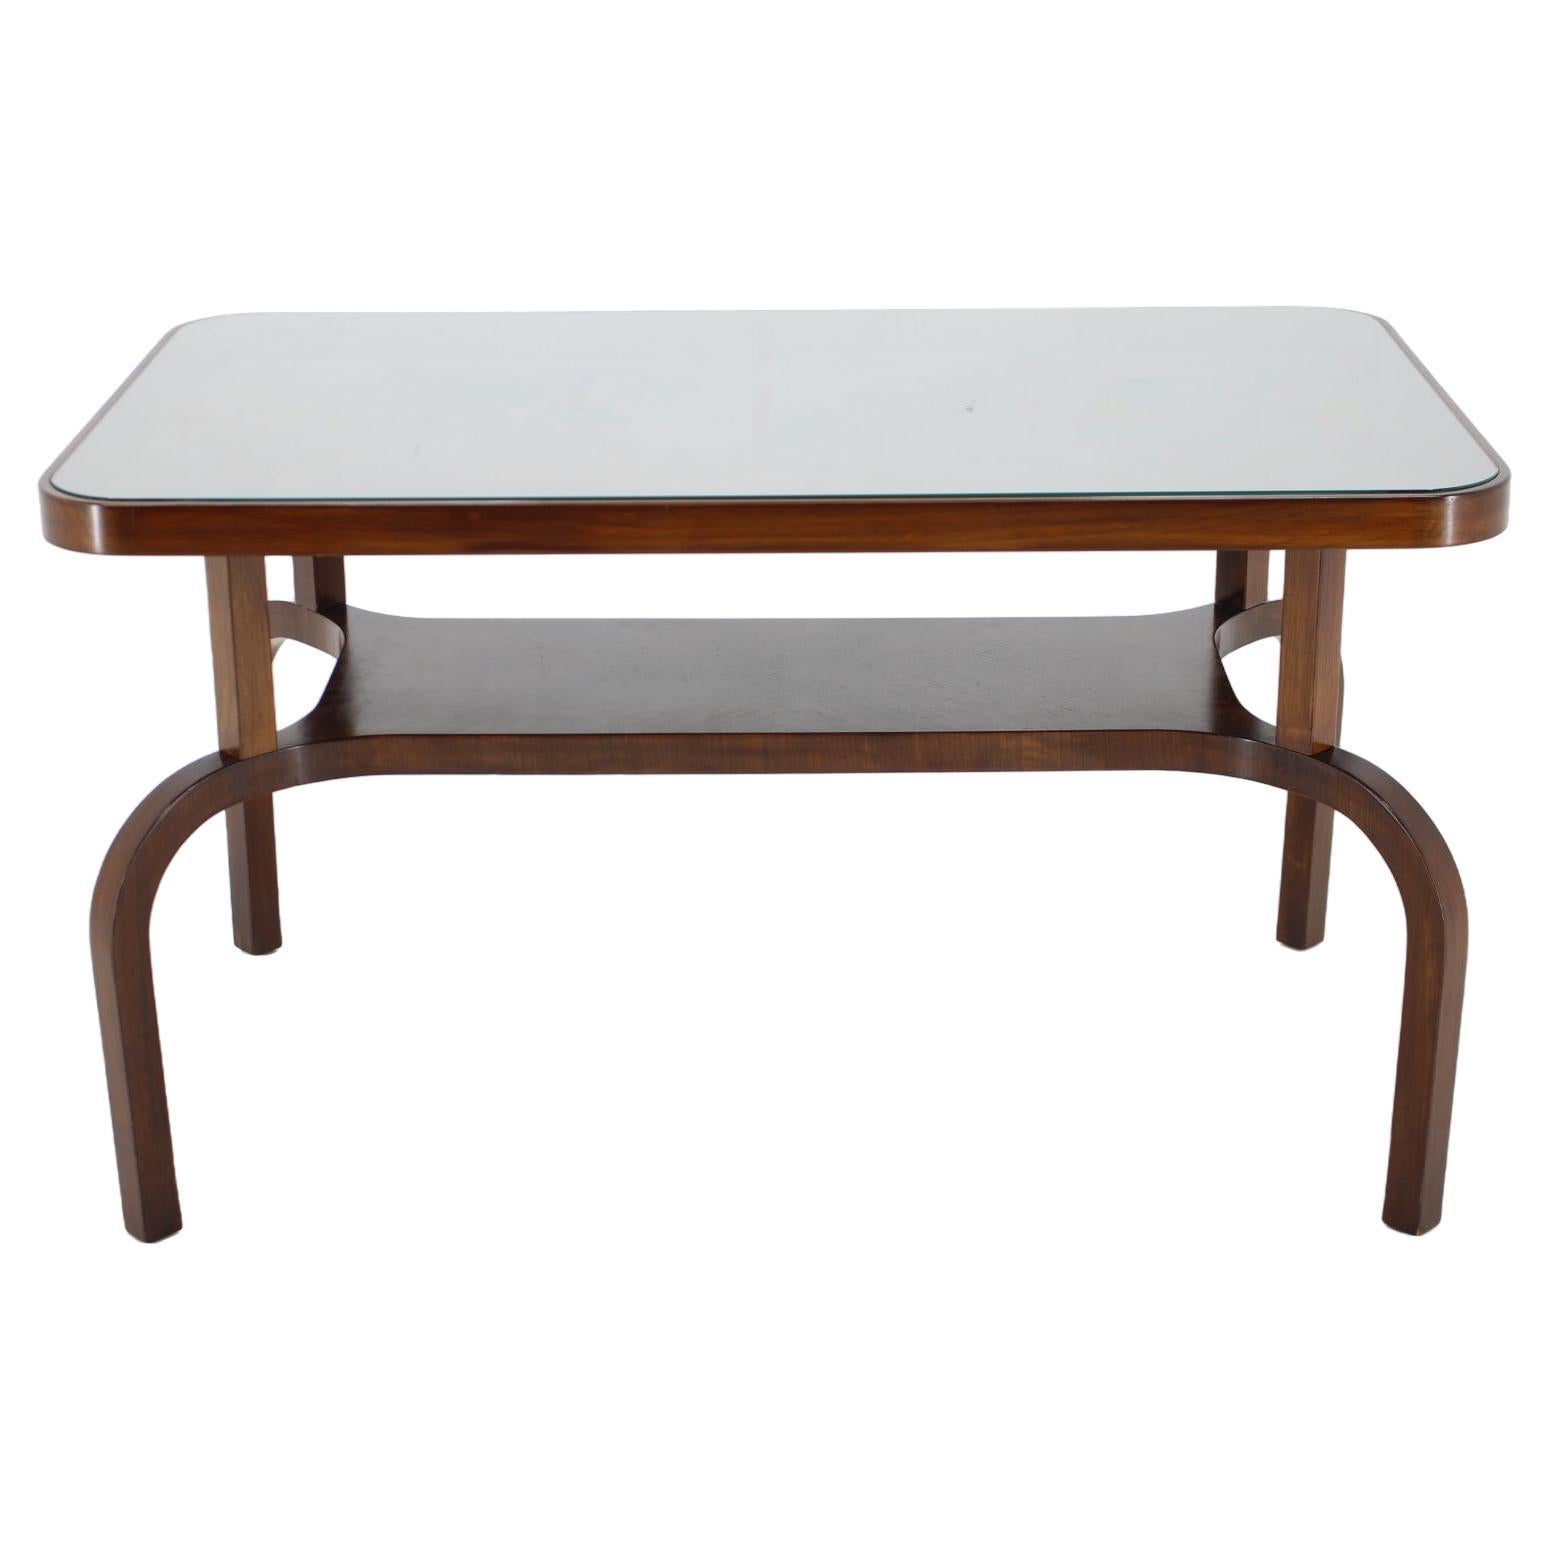 1930s Restored Coffee Table in Walnut with Glass Top, Czechoslovakia For Sale